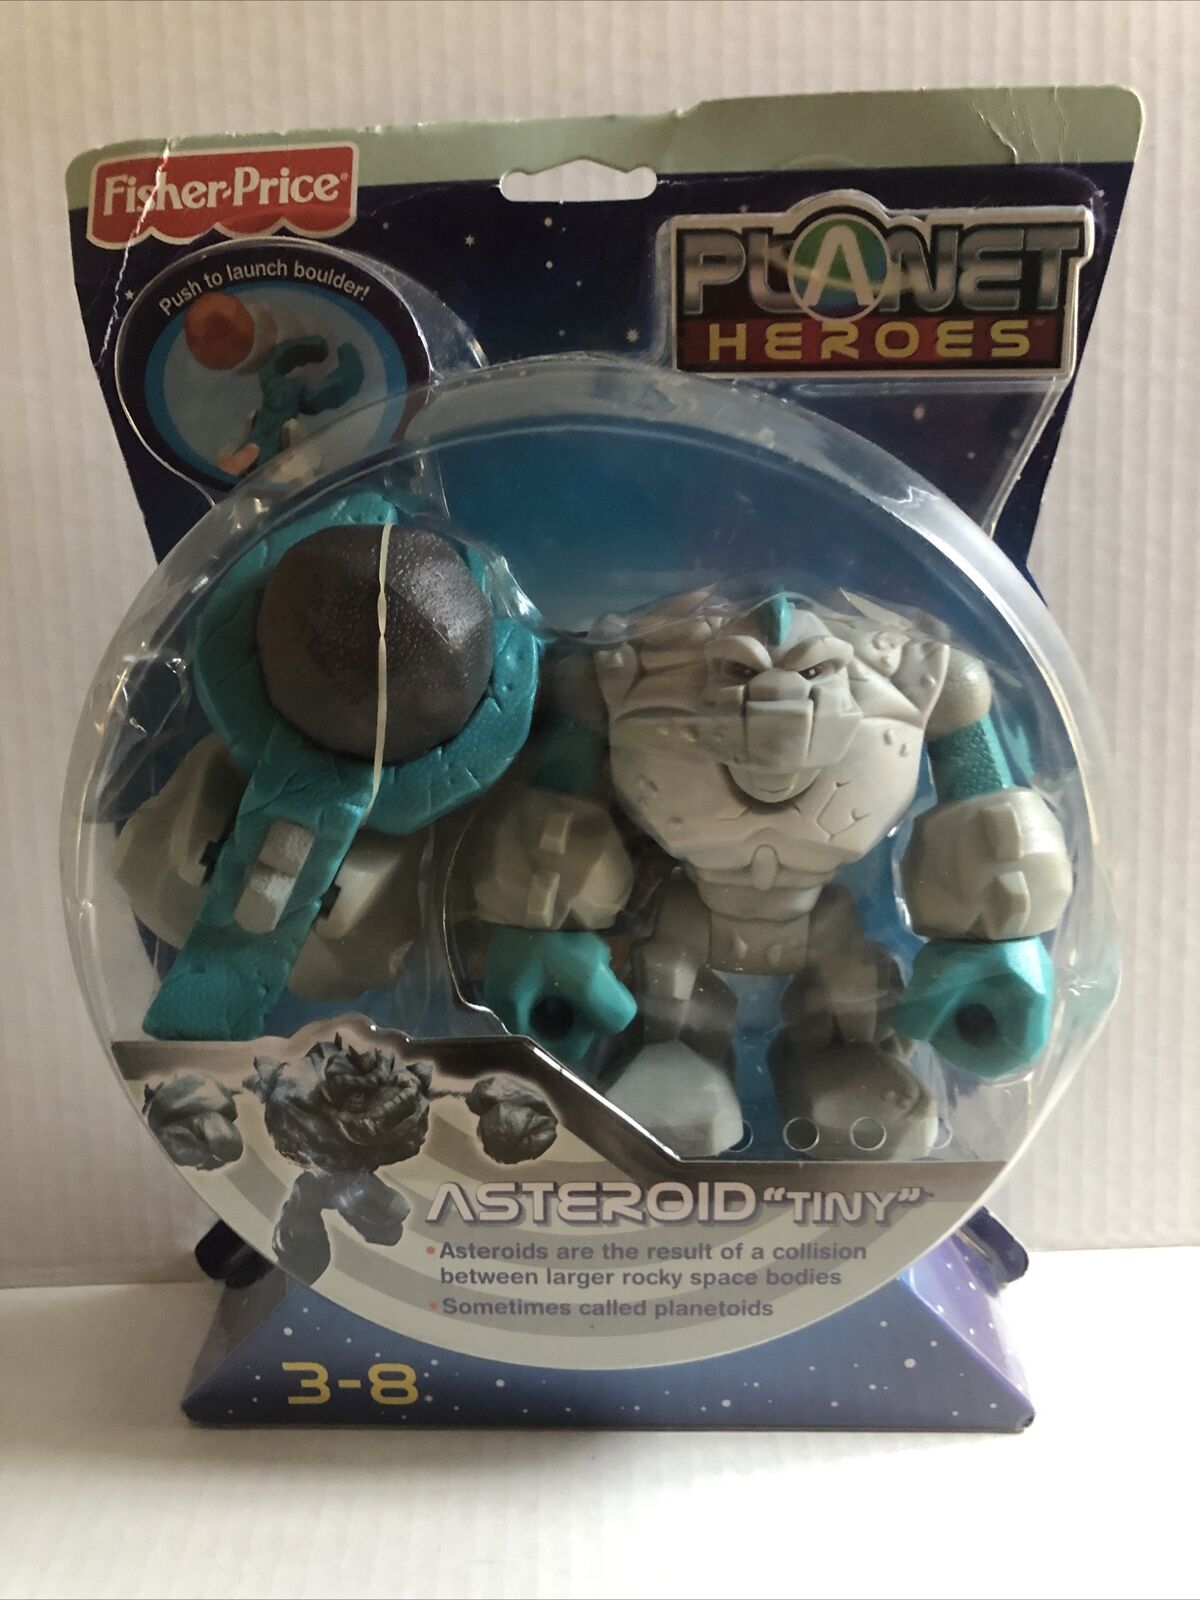 Asteroid "tiny" L1998 Planet Heroes Figures Fisher Price